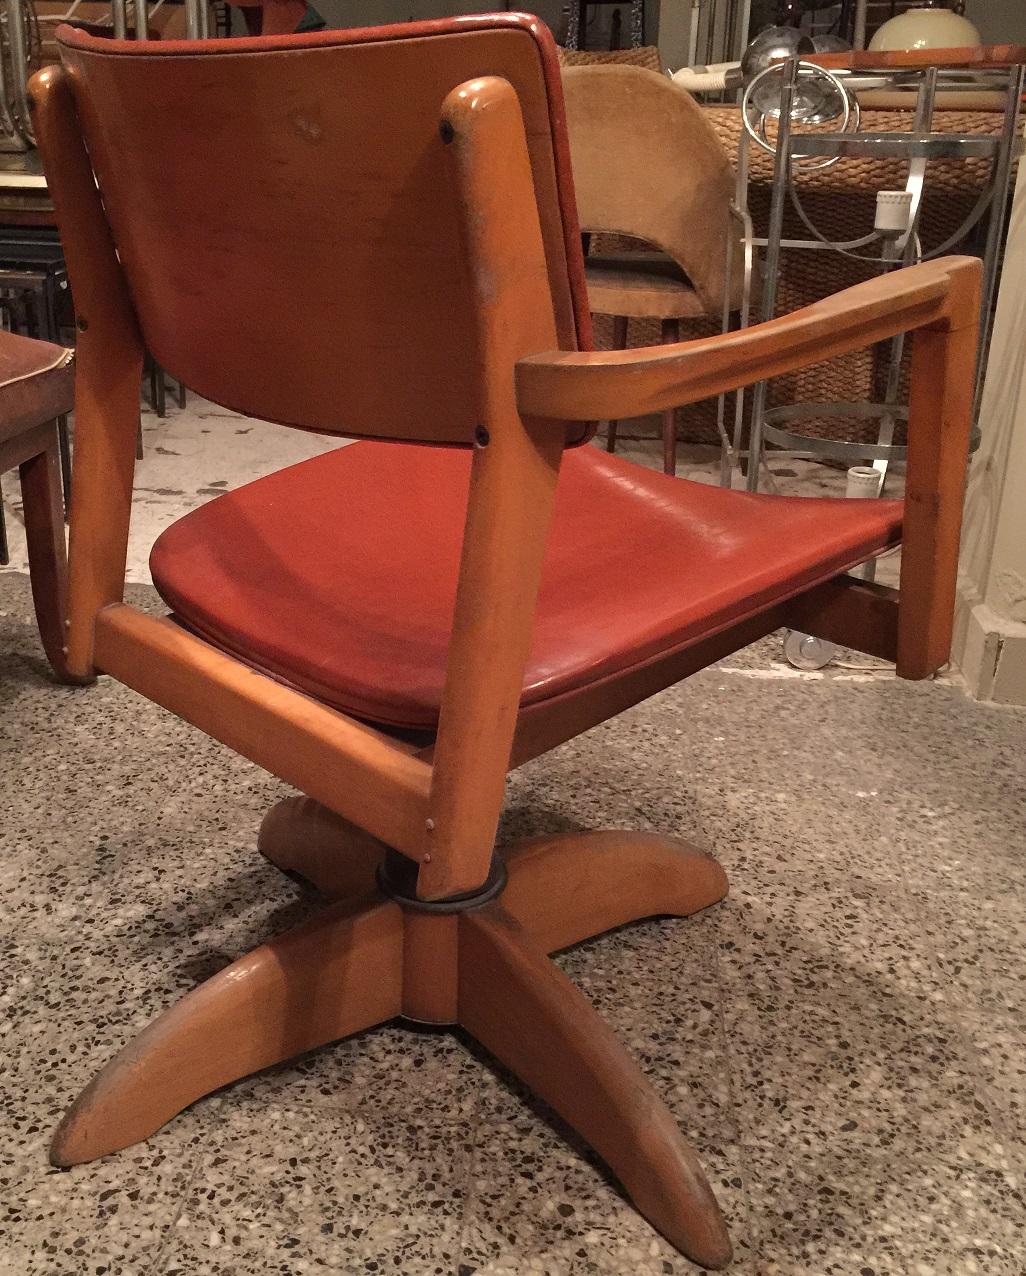 Art Deco desk chair

Wood
Year: 1950
If you are looking for a desk chair to match your desk, we have what you need. 
We have specialized in the sale of Art Deco and Art Nouveau and Vintage styles since 1982.
Pushing the button that reads 'View All